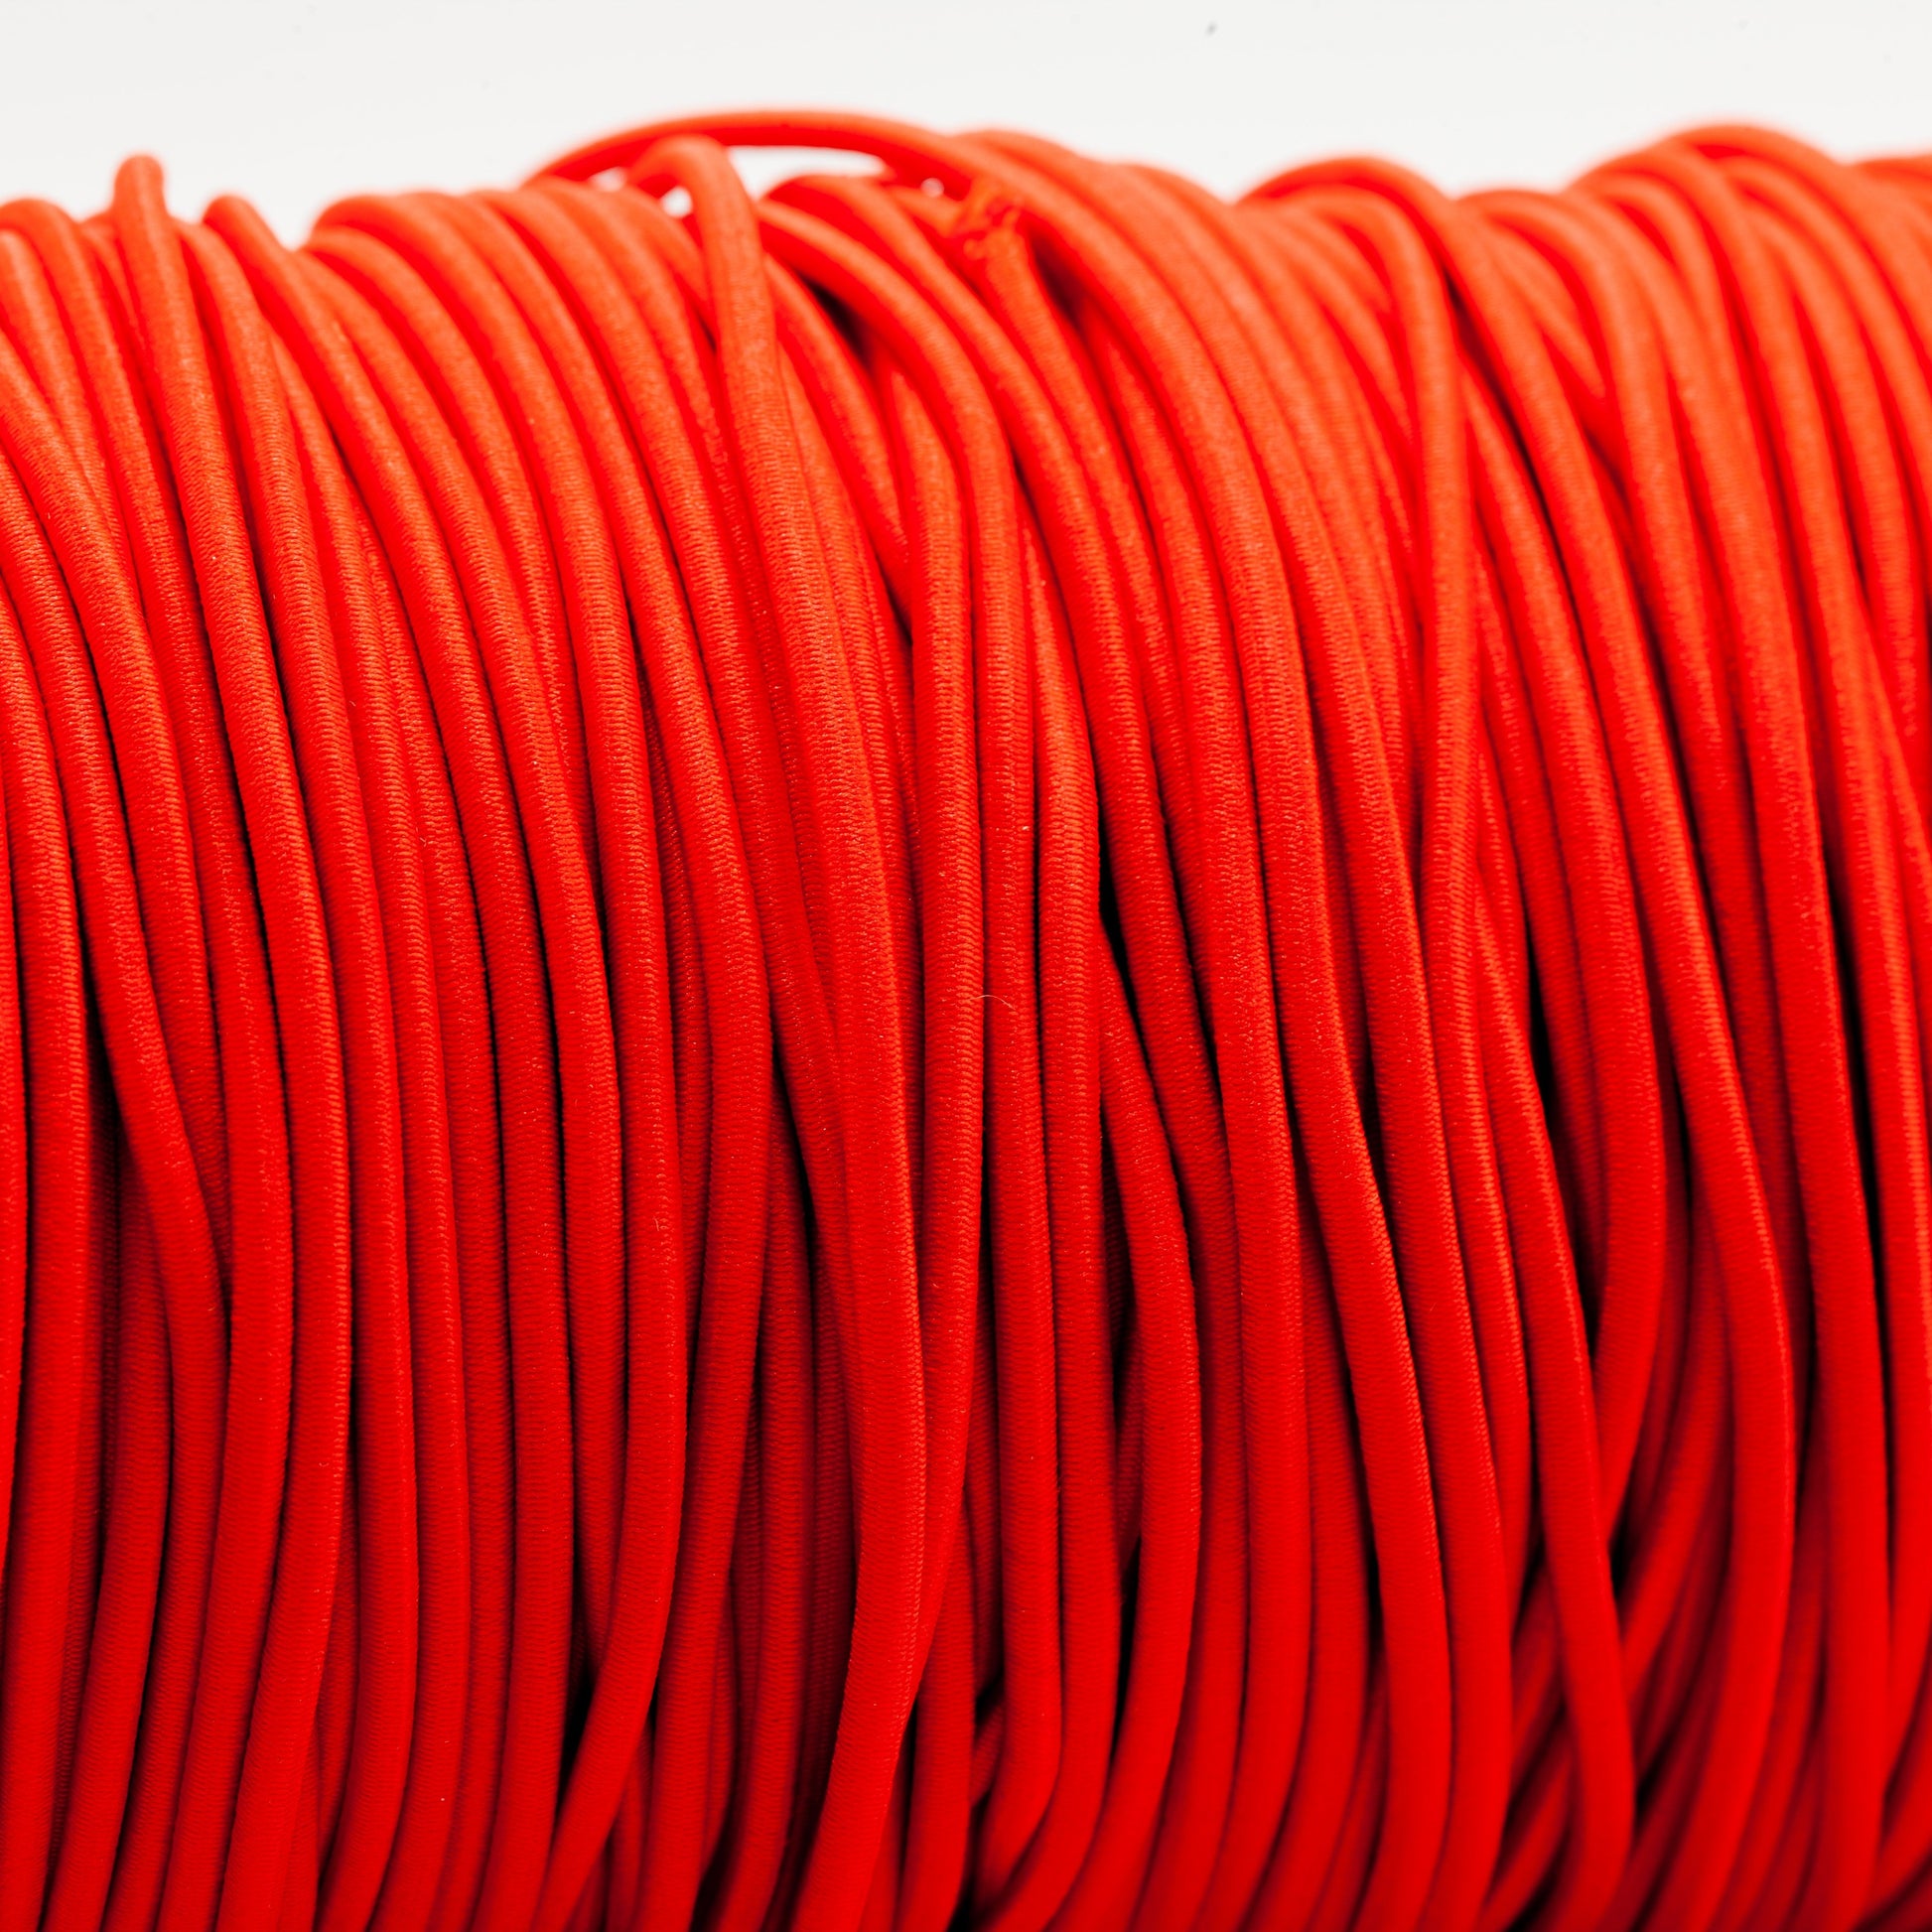 Bungee Cord, Red - detail